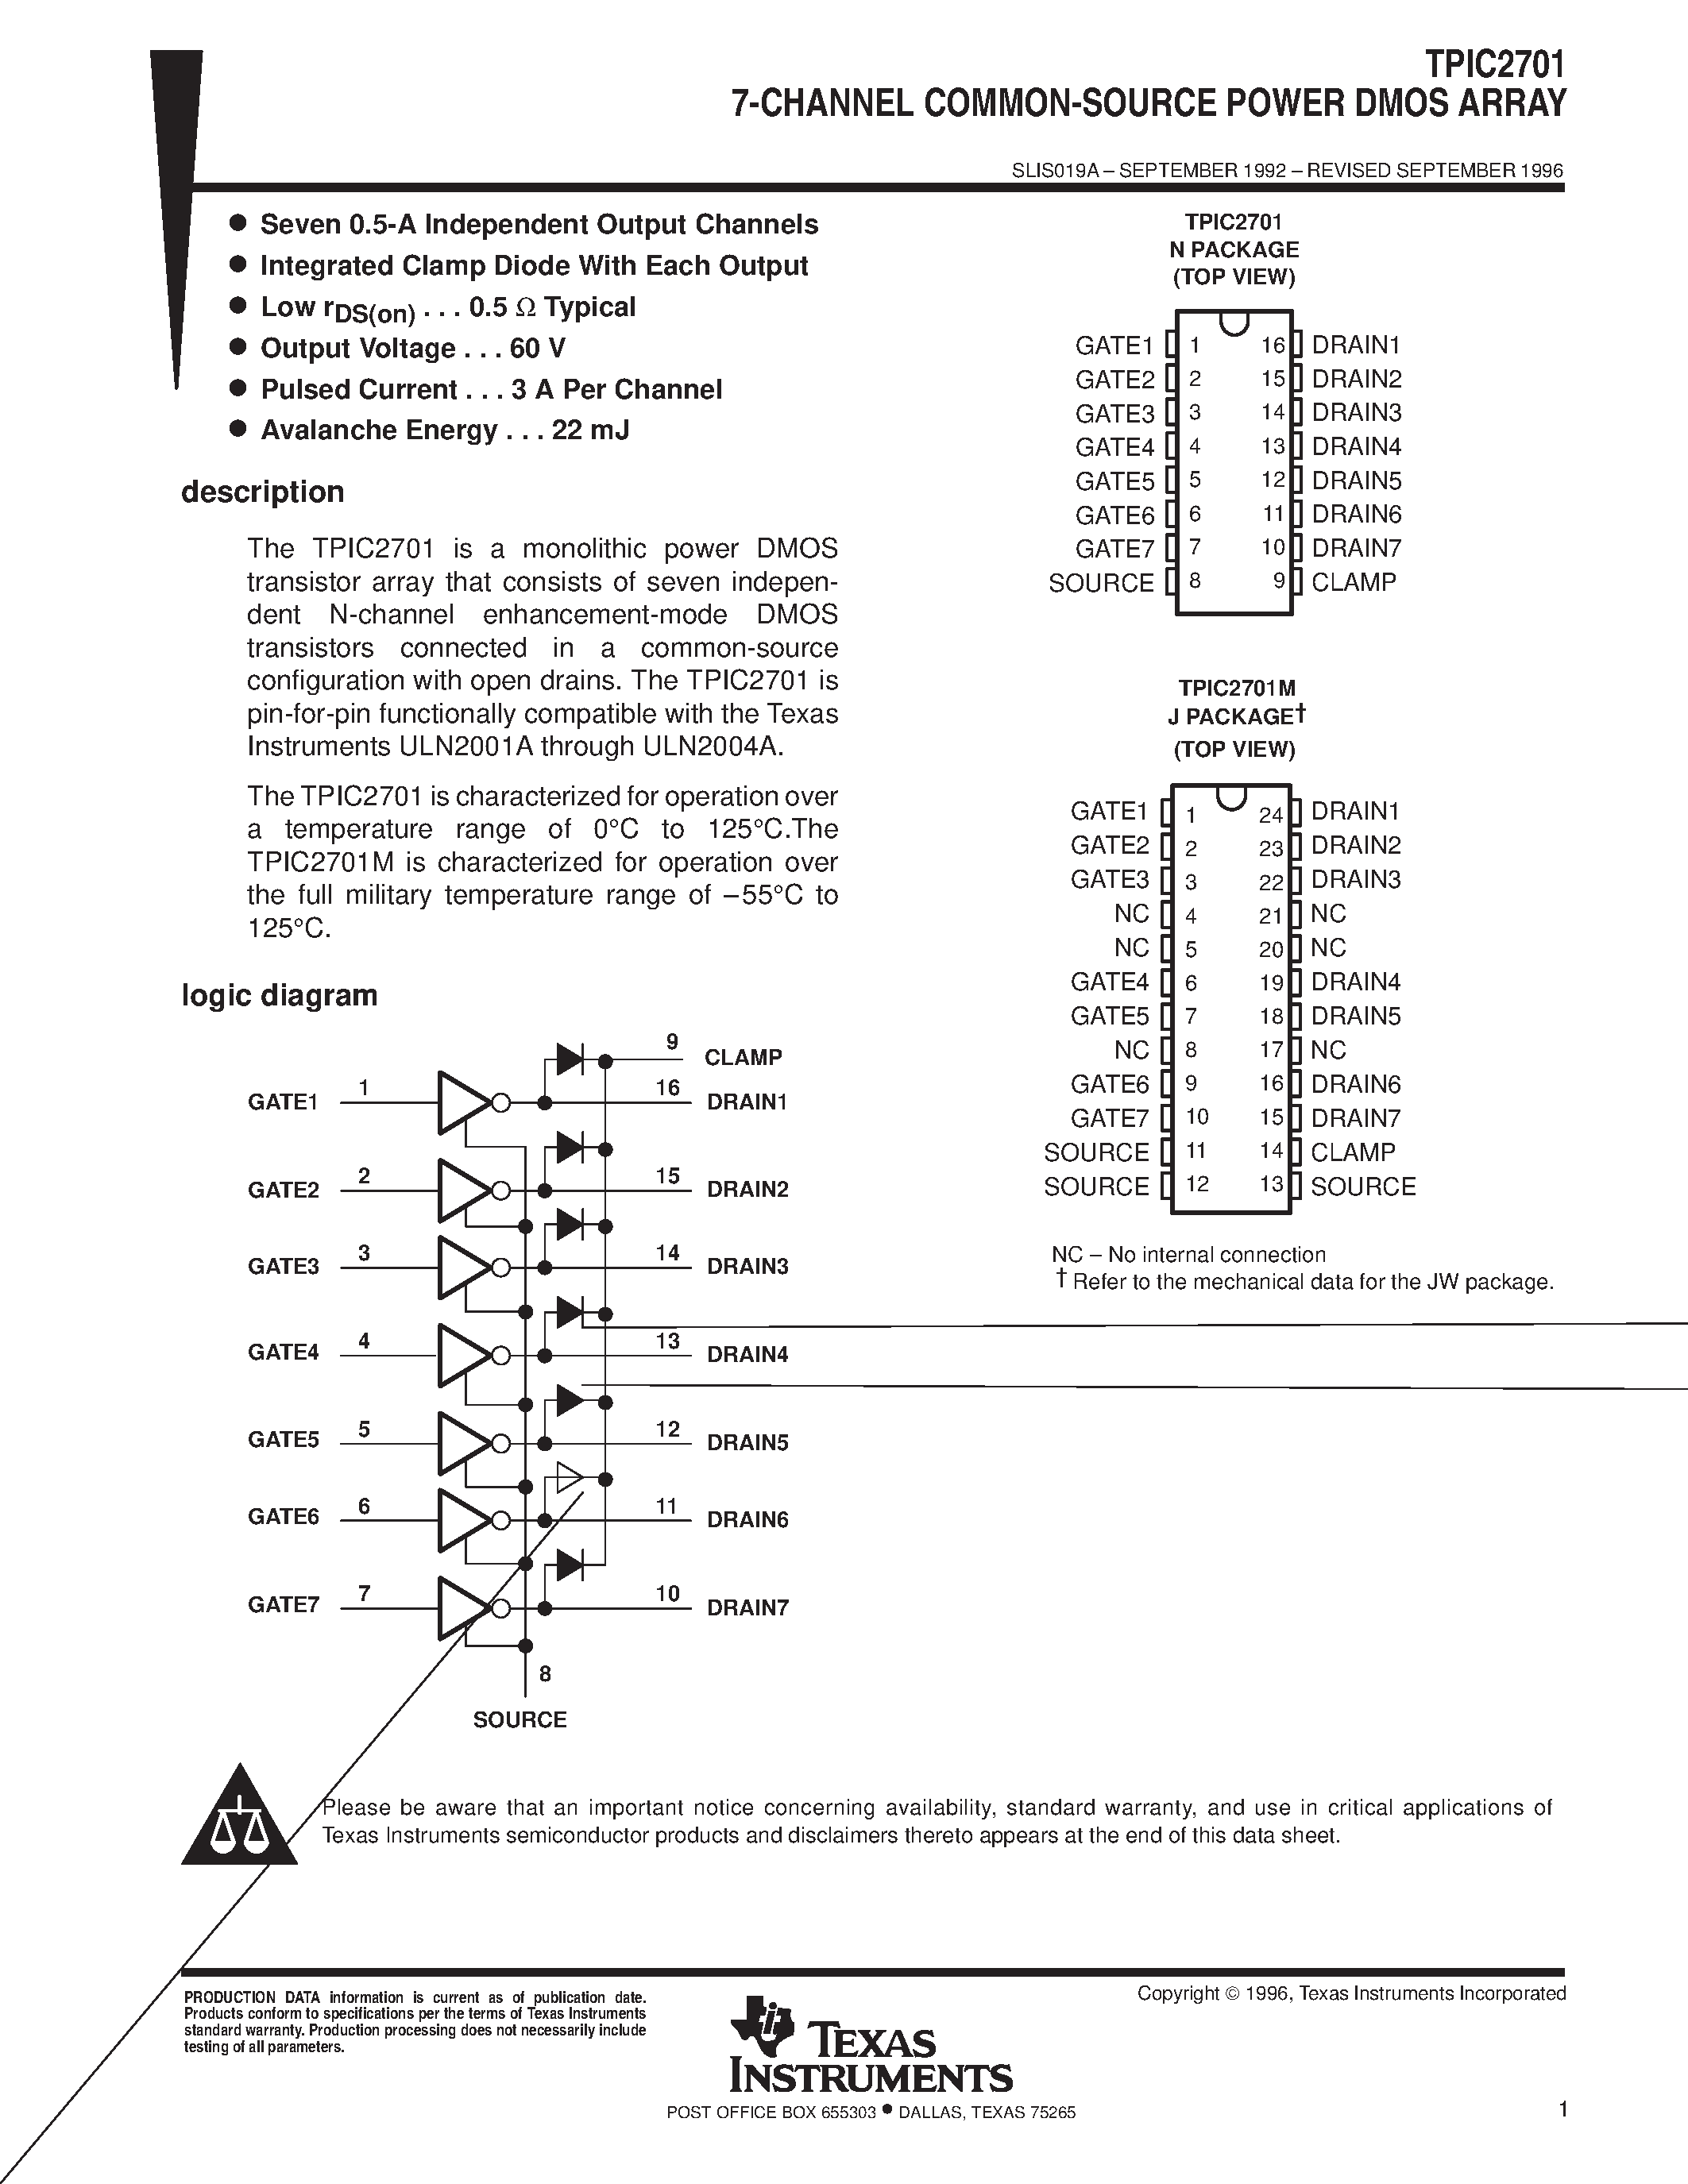 Datasheet TPIC2701MJ - 7-CHANNEL COMMON-SOURCE POWER DMOS ARRAY page 1